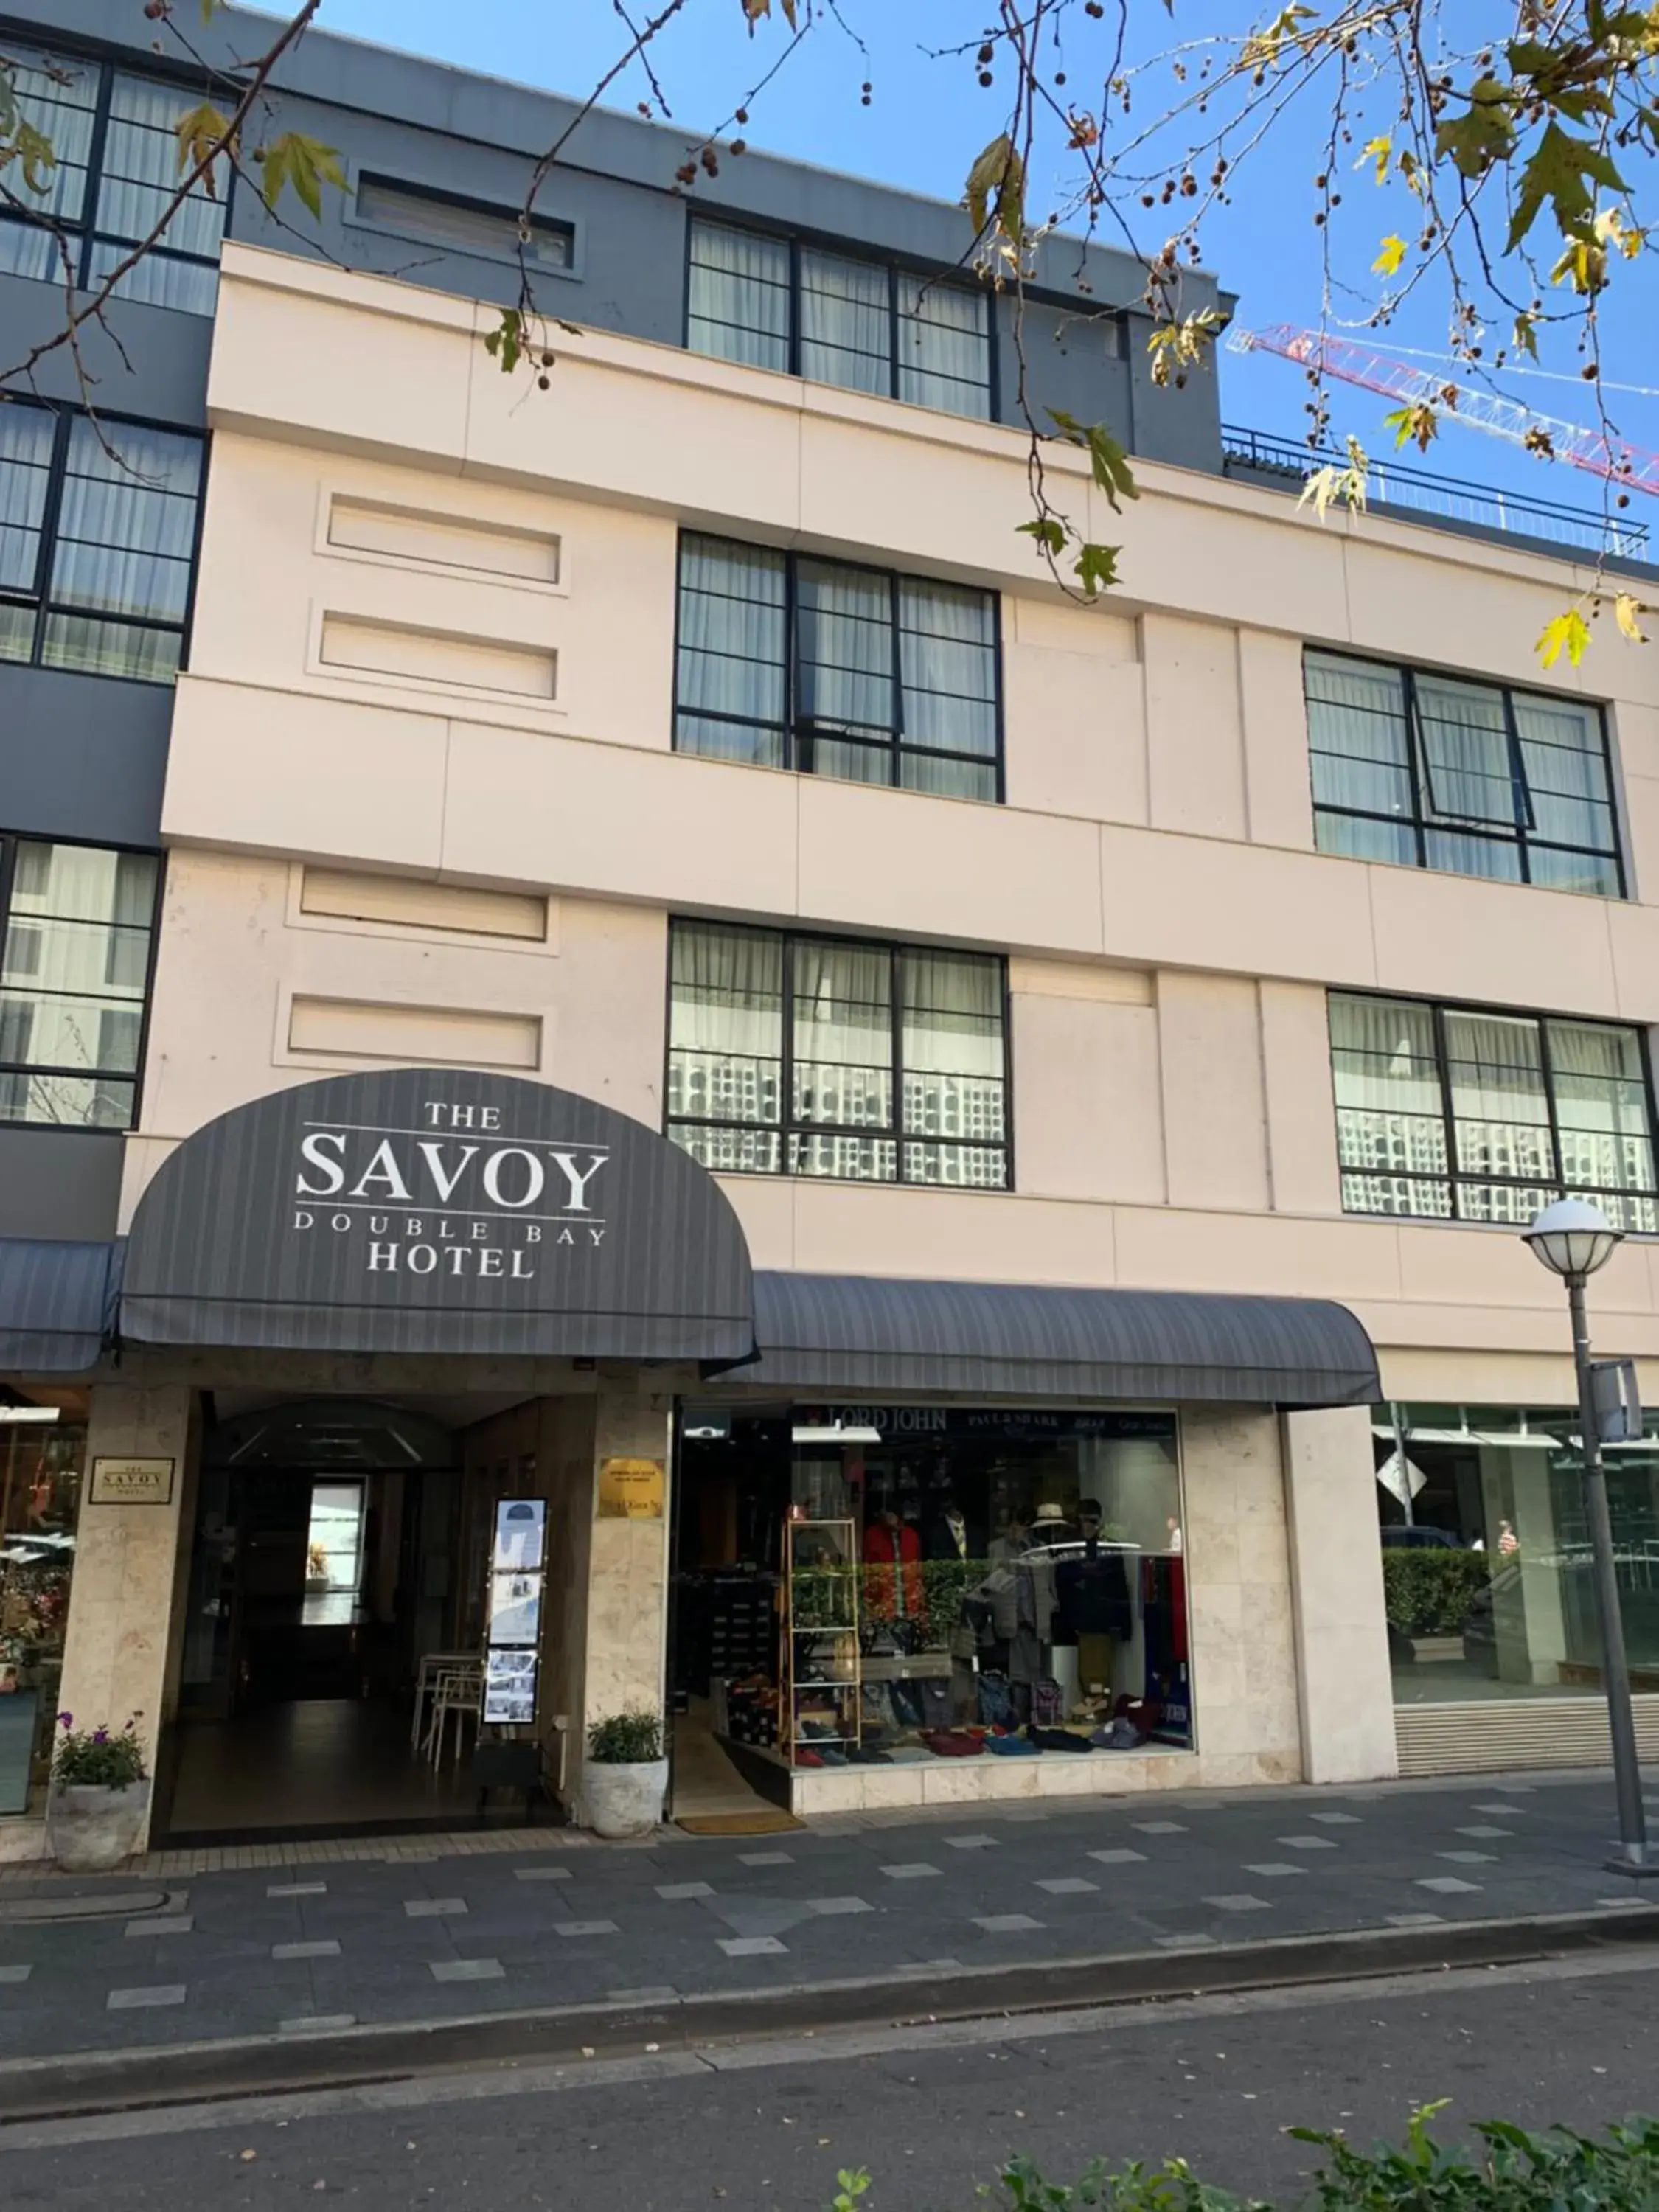 Property building in Savoy Double Bay Hotel